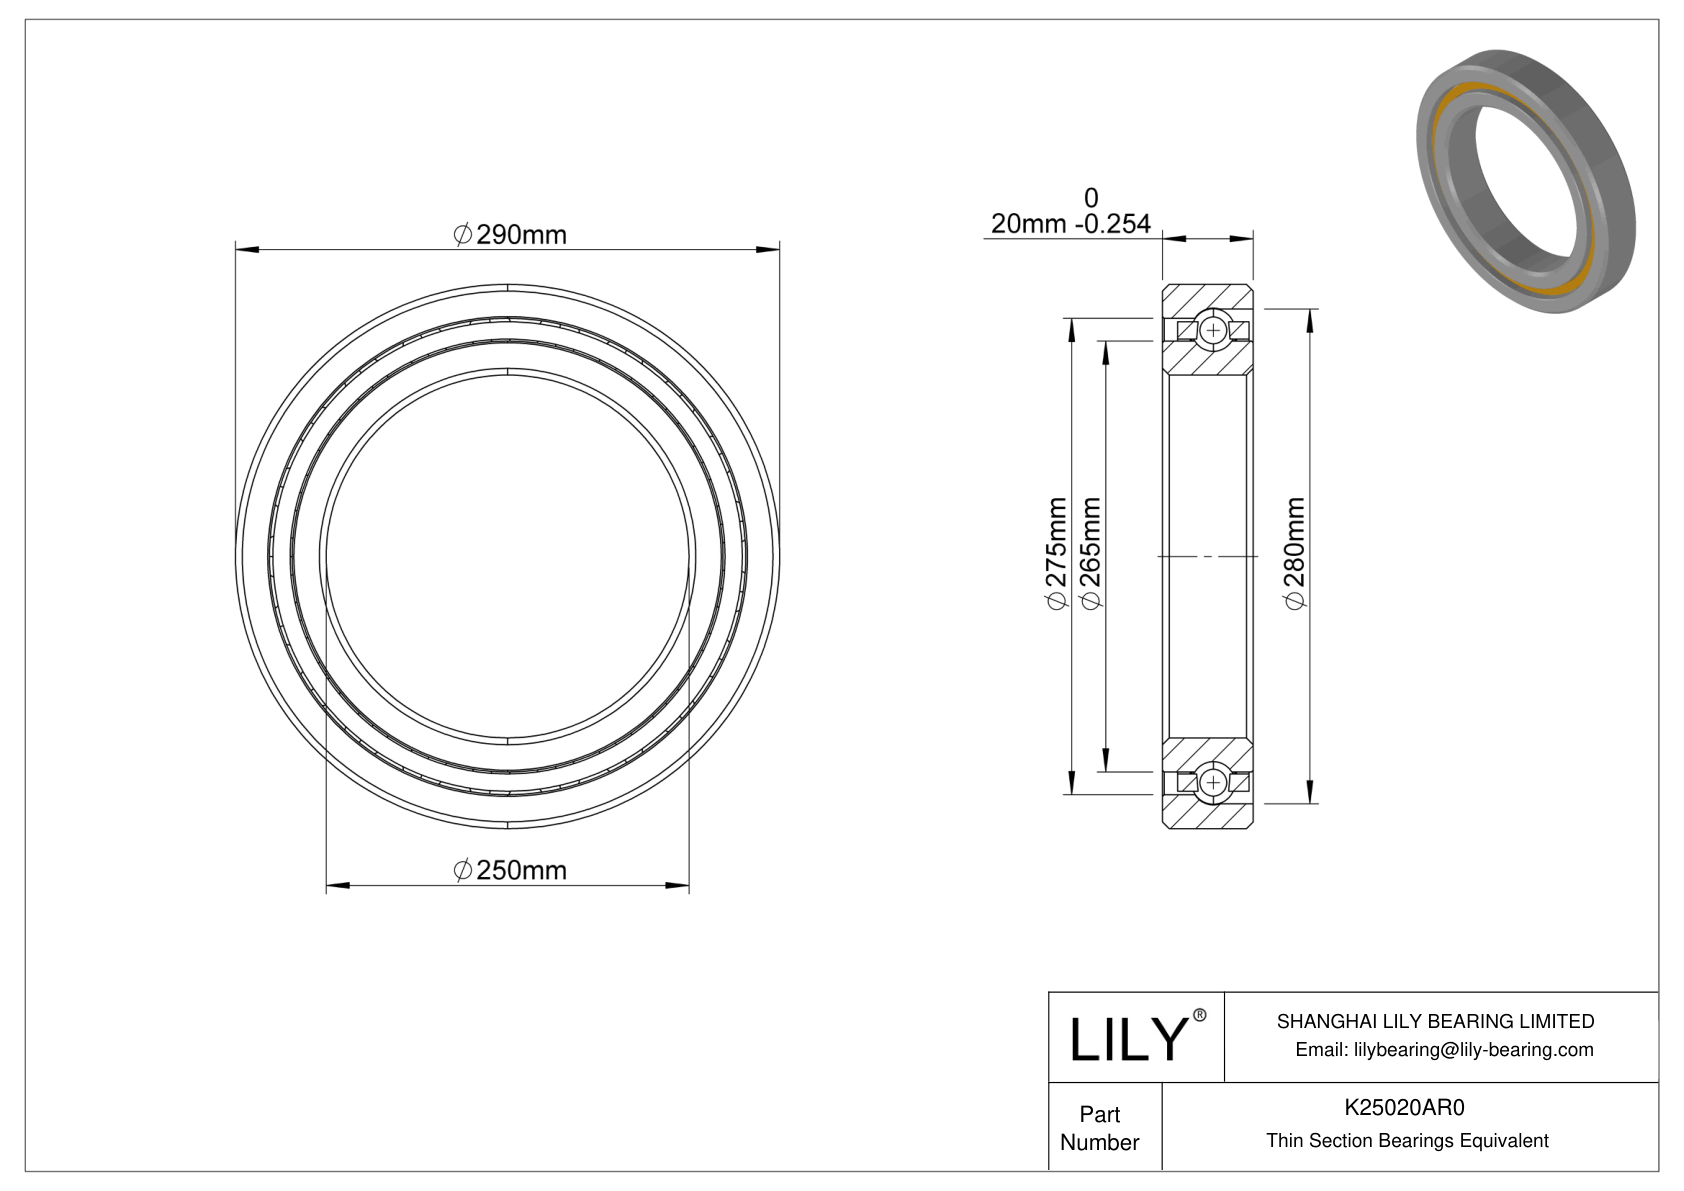 K25020AR0 Constant Section (CS) Bearings cad drawing